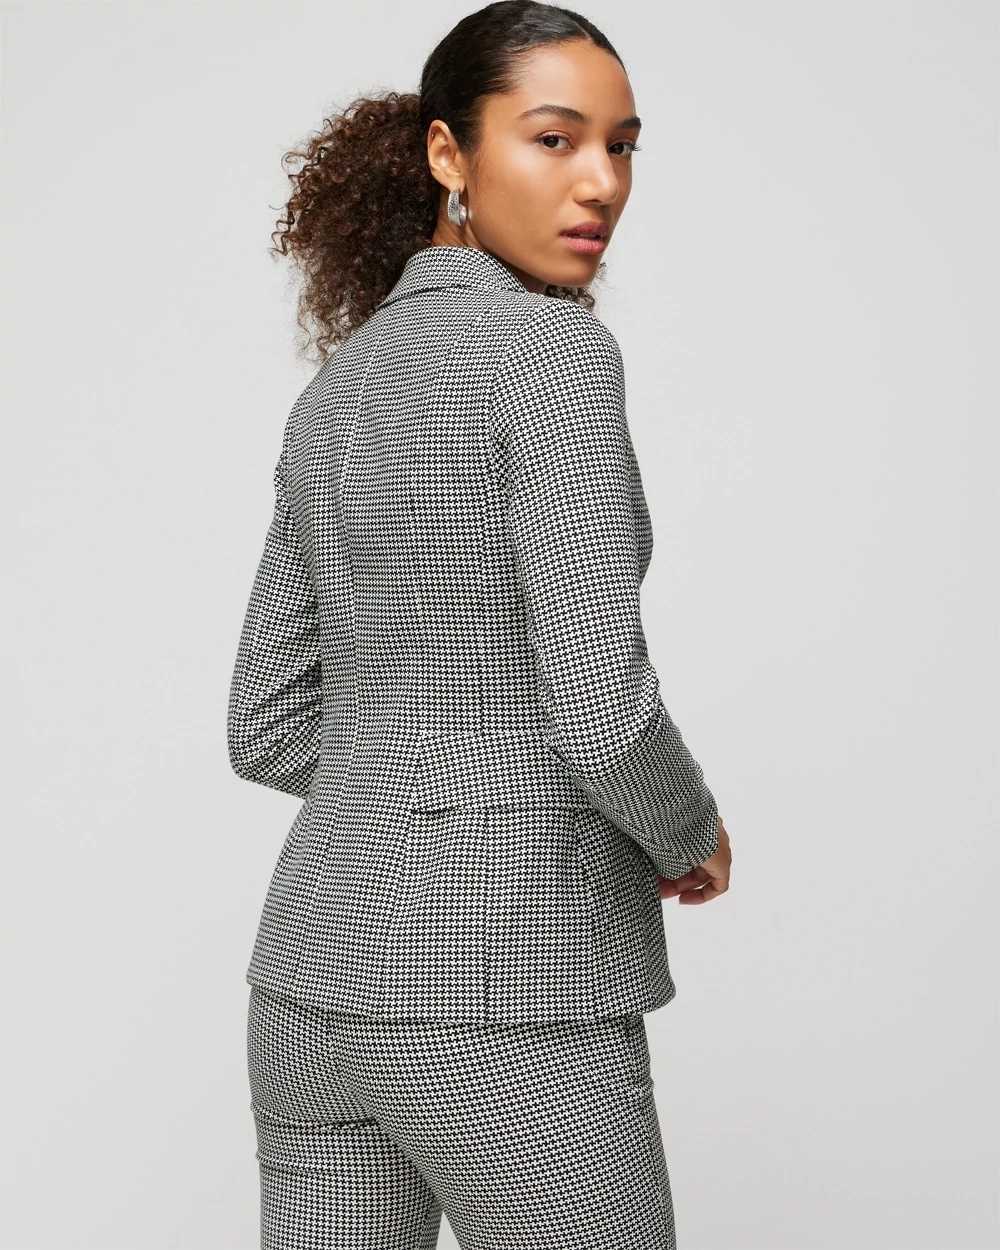 Petite WHBM® Houndstooth Signature Jacket click to view larger image.